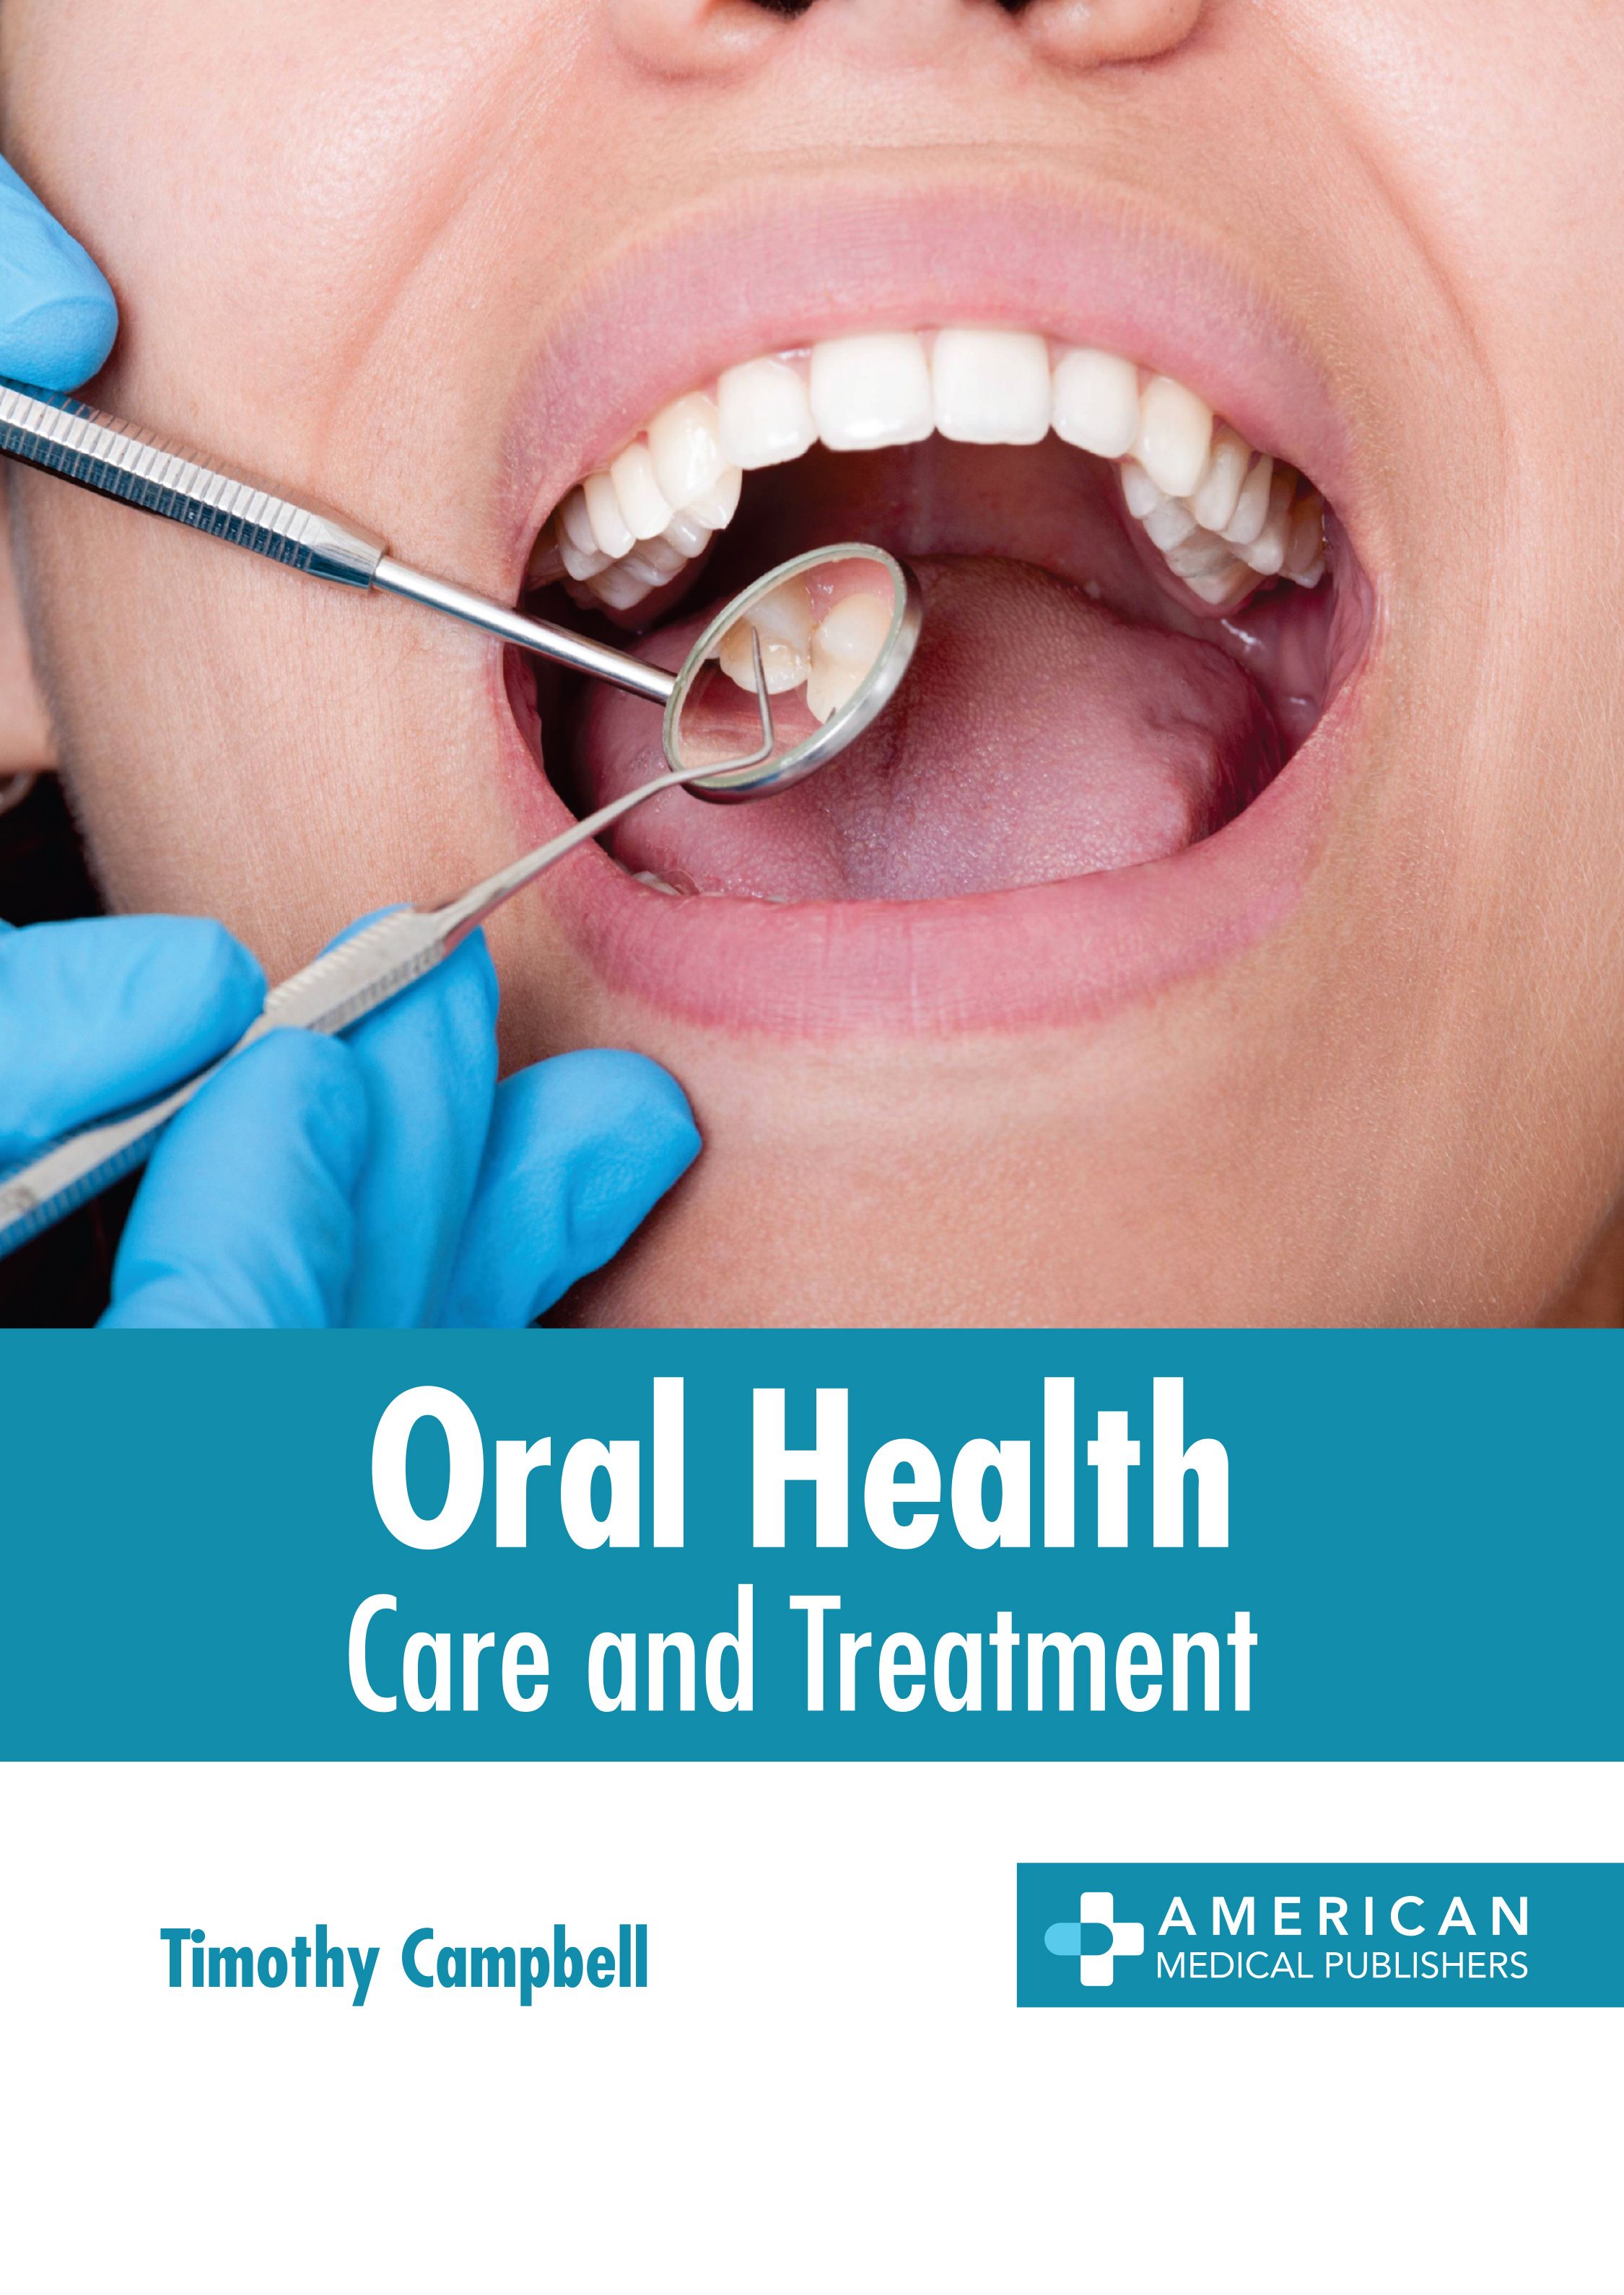 ORAL HEALTH: CARE AND TREATMENT